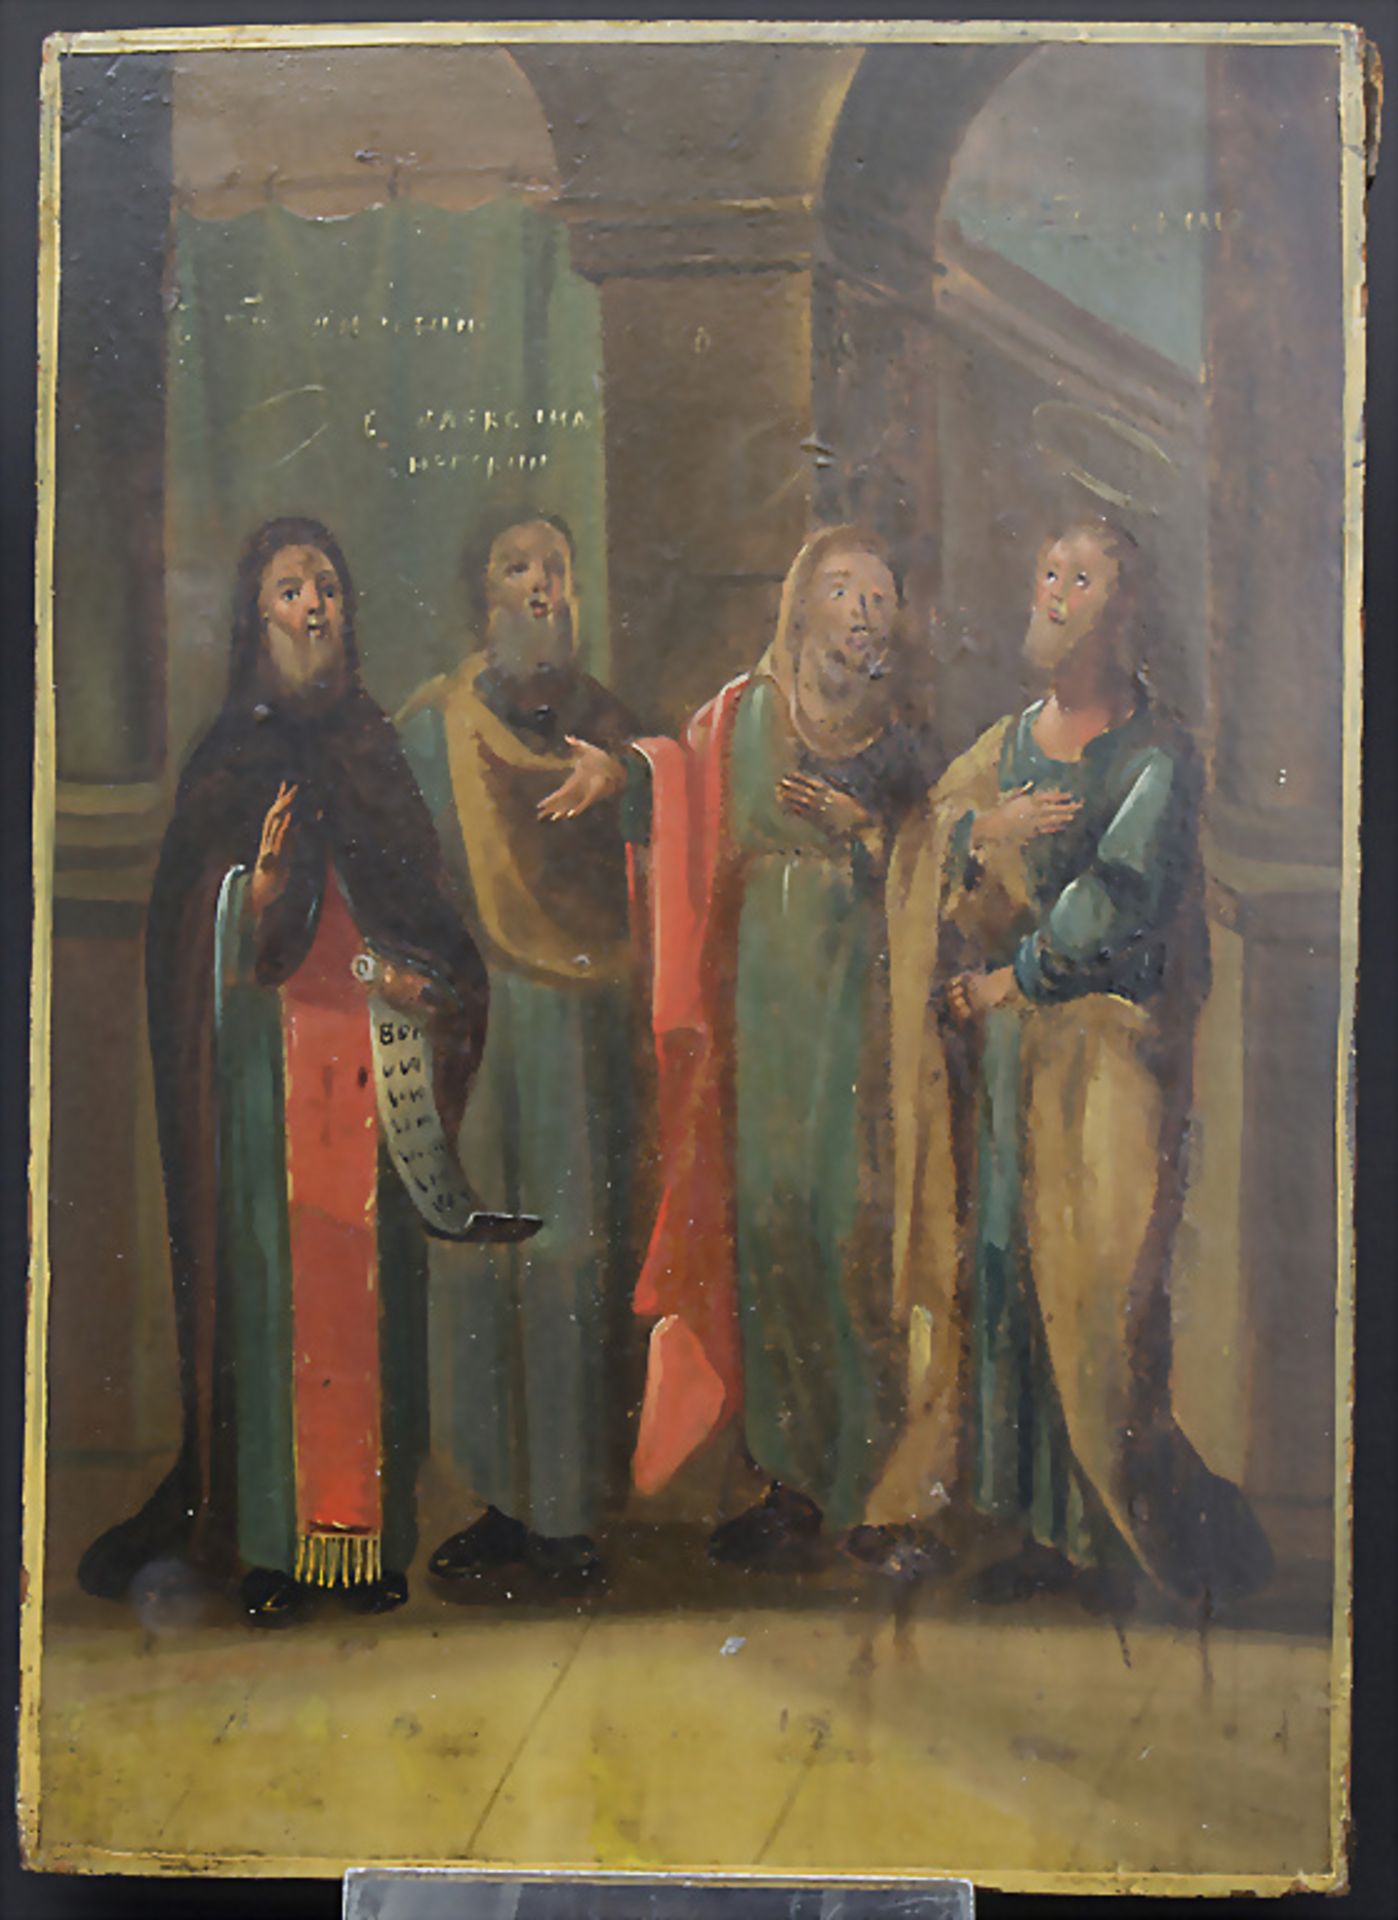 Ikone 'Heilige' mit Silber-Oklad / An icon 'with saints', St. Petersburg, 1829 - Image 2 of 2